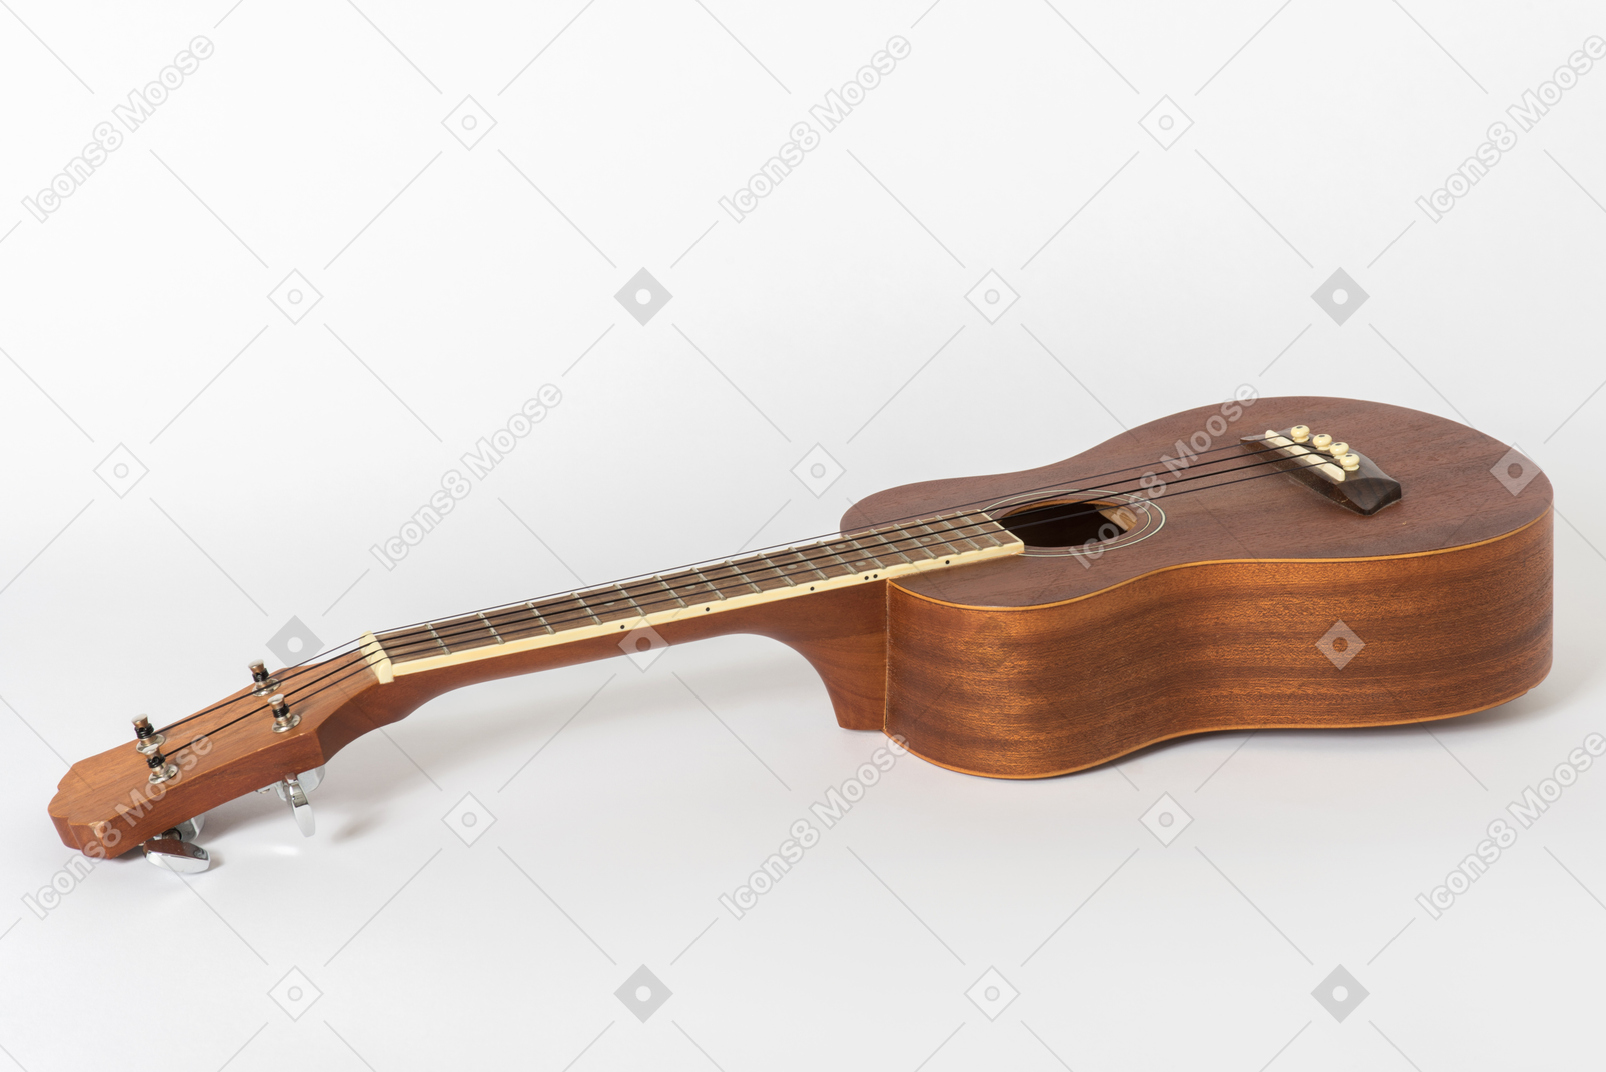 Guitar on white background